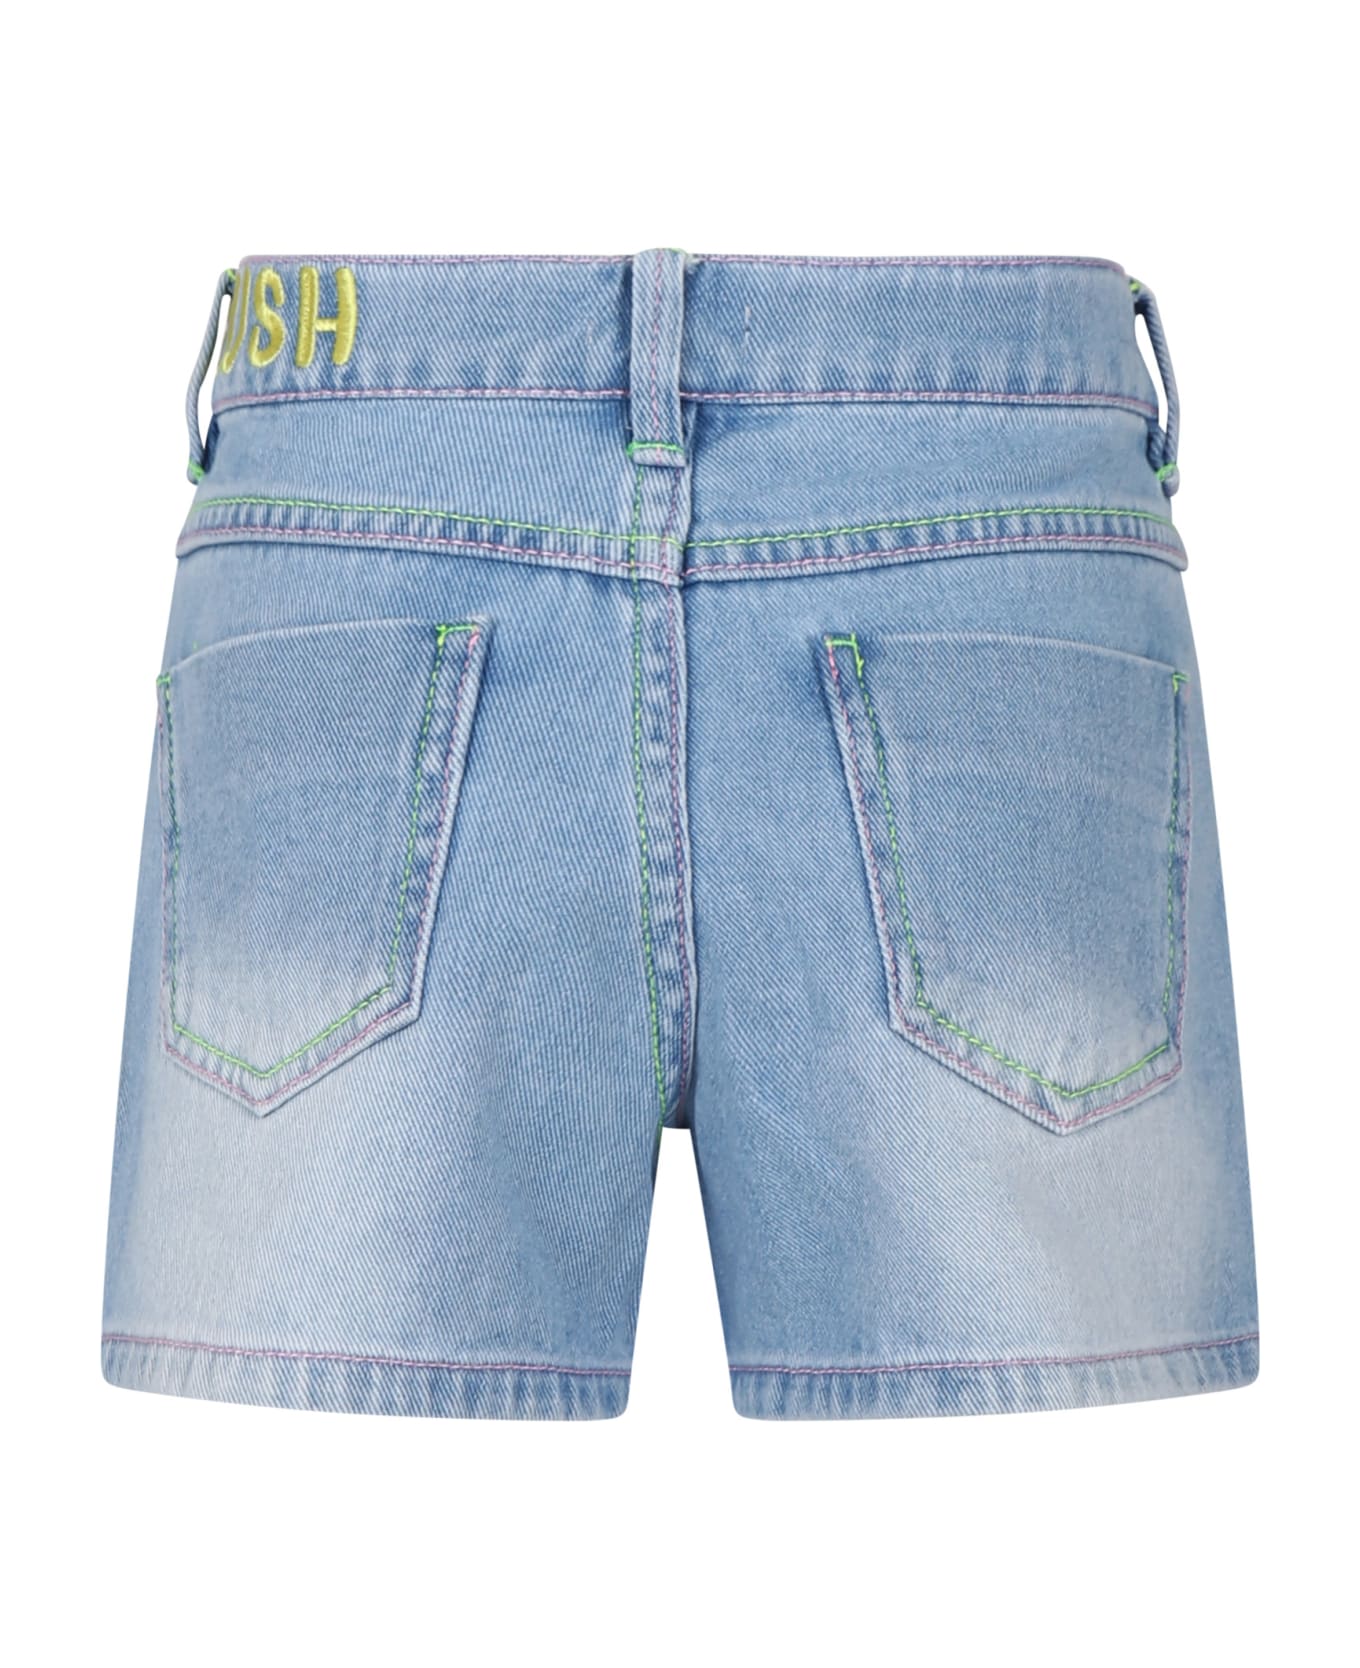 Billieblush Denim Shorts For Girl With All-over Embroidery - Denim ボトムス